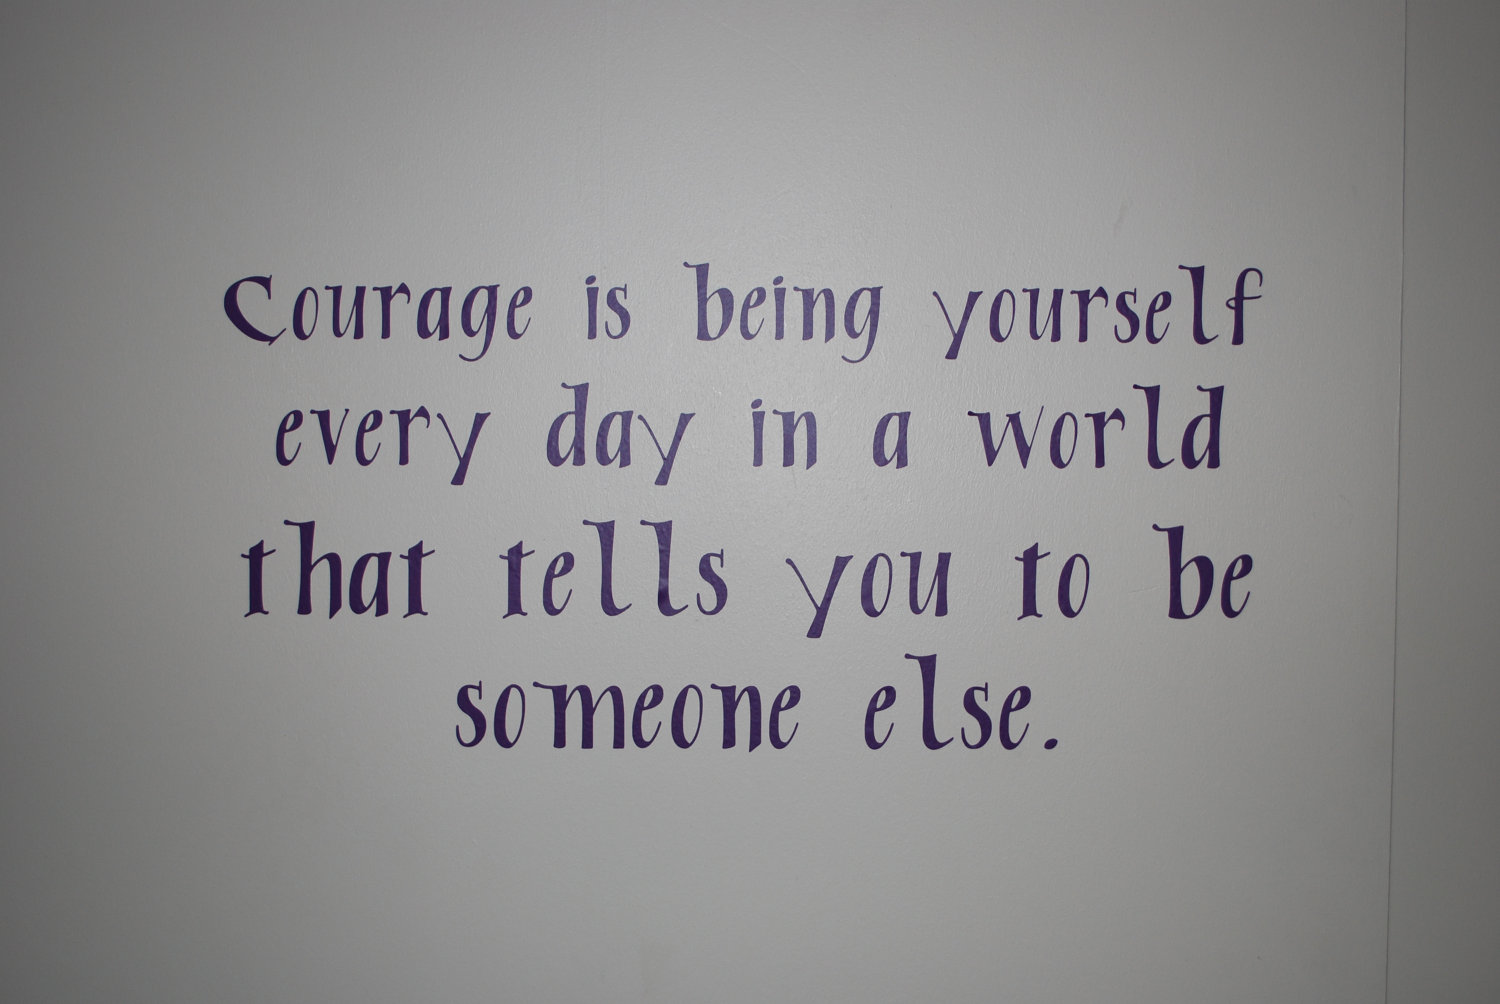 Courage is being yourself everyday in a world that tells you to be someone else.